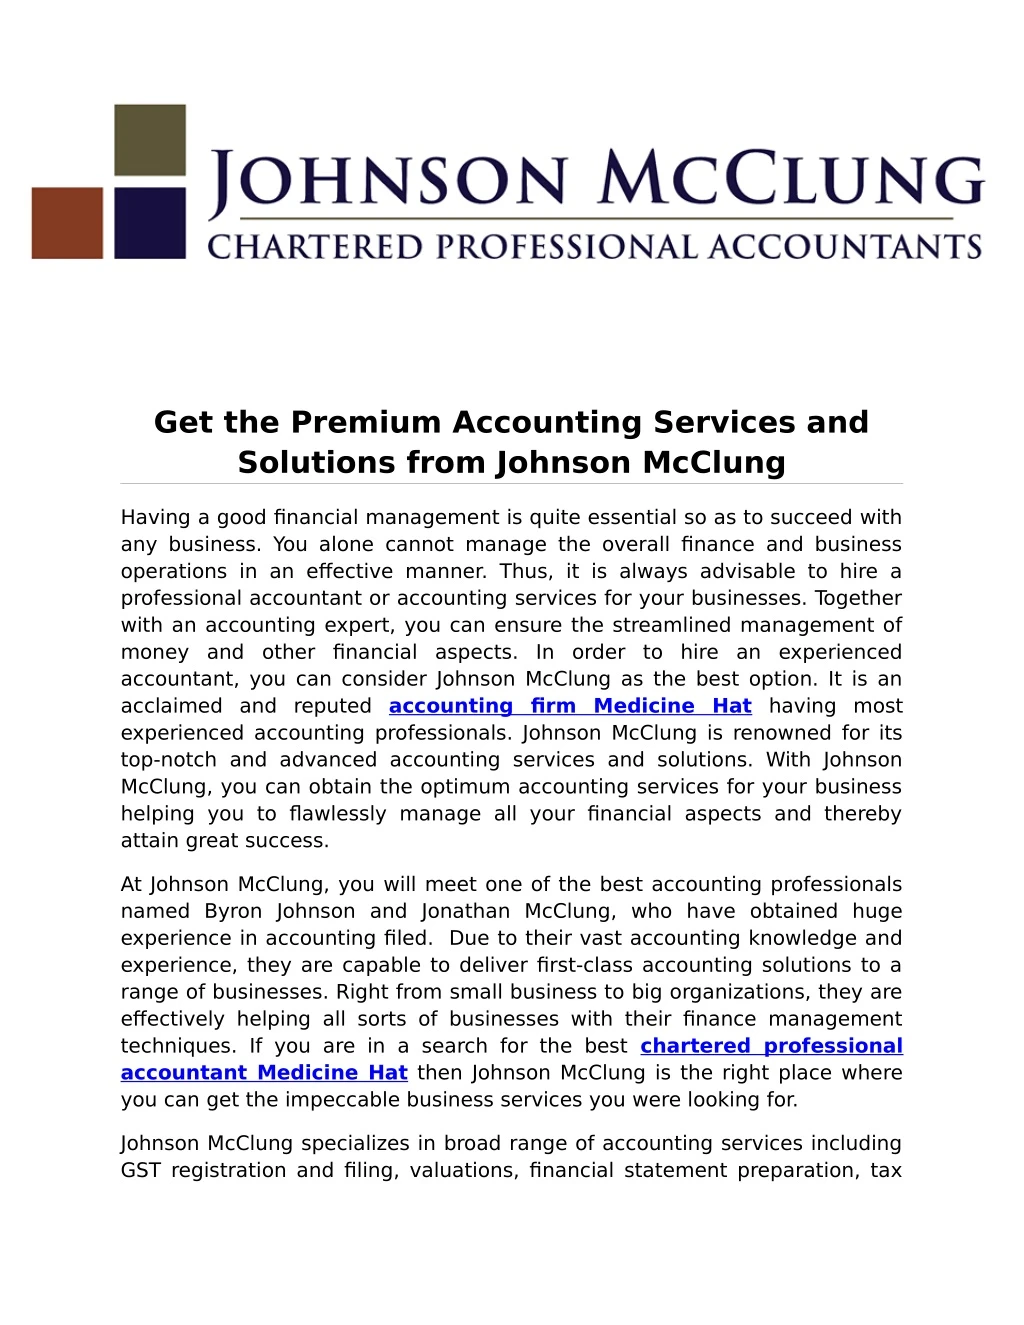 get the premium accounting services and solutions